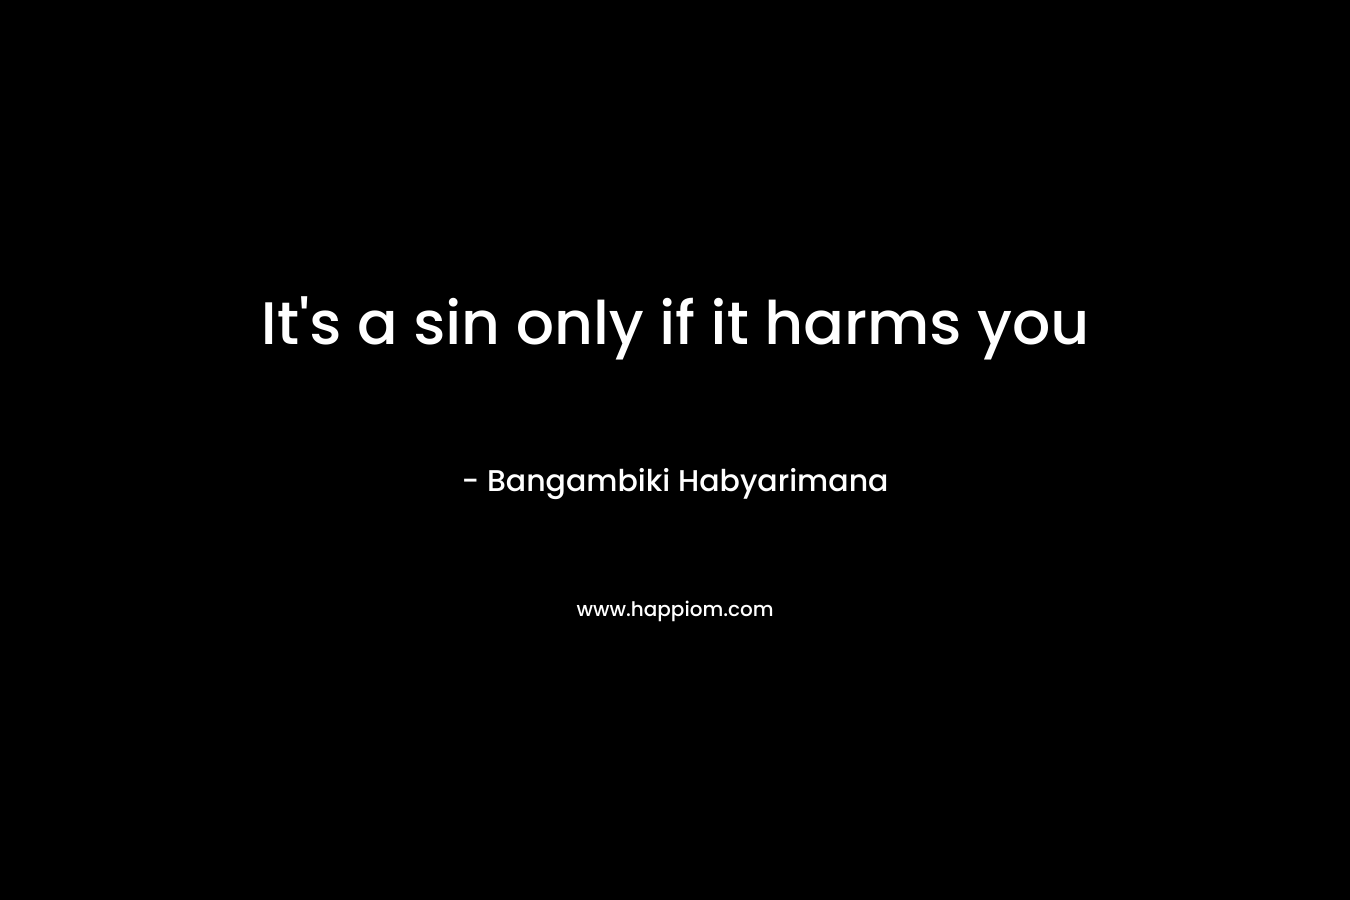 It’s a sin only if it harms you – Bangambiki Habyarimana